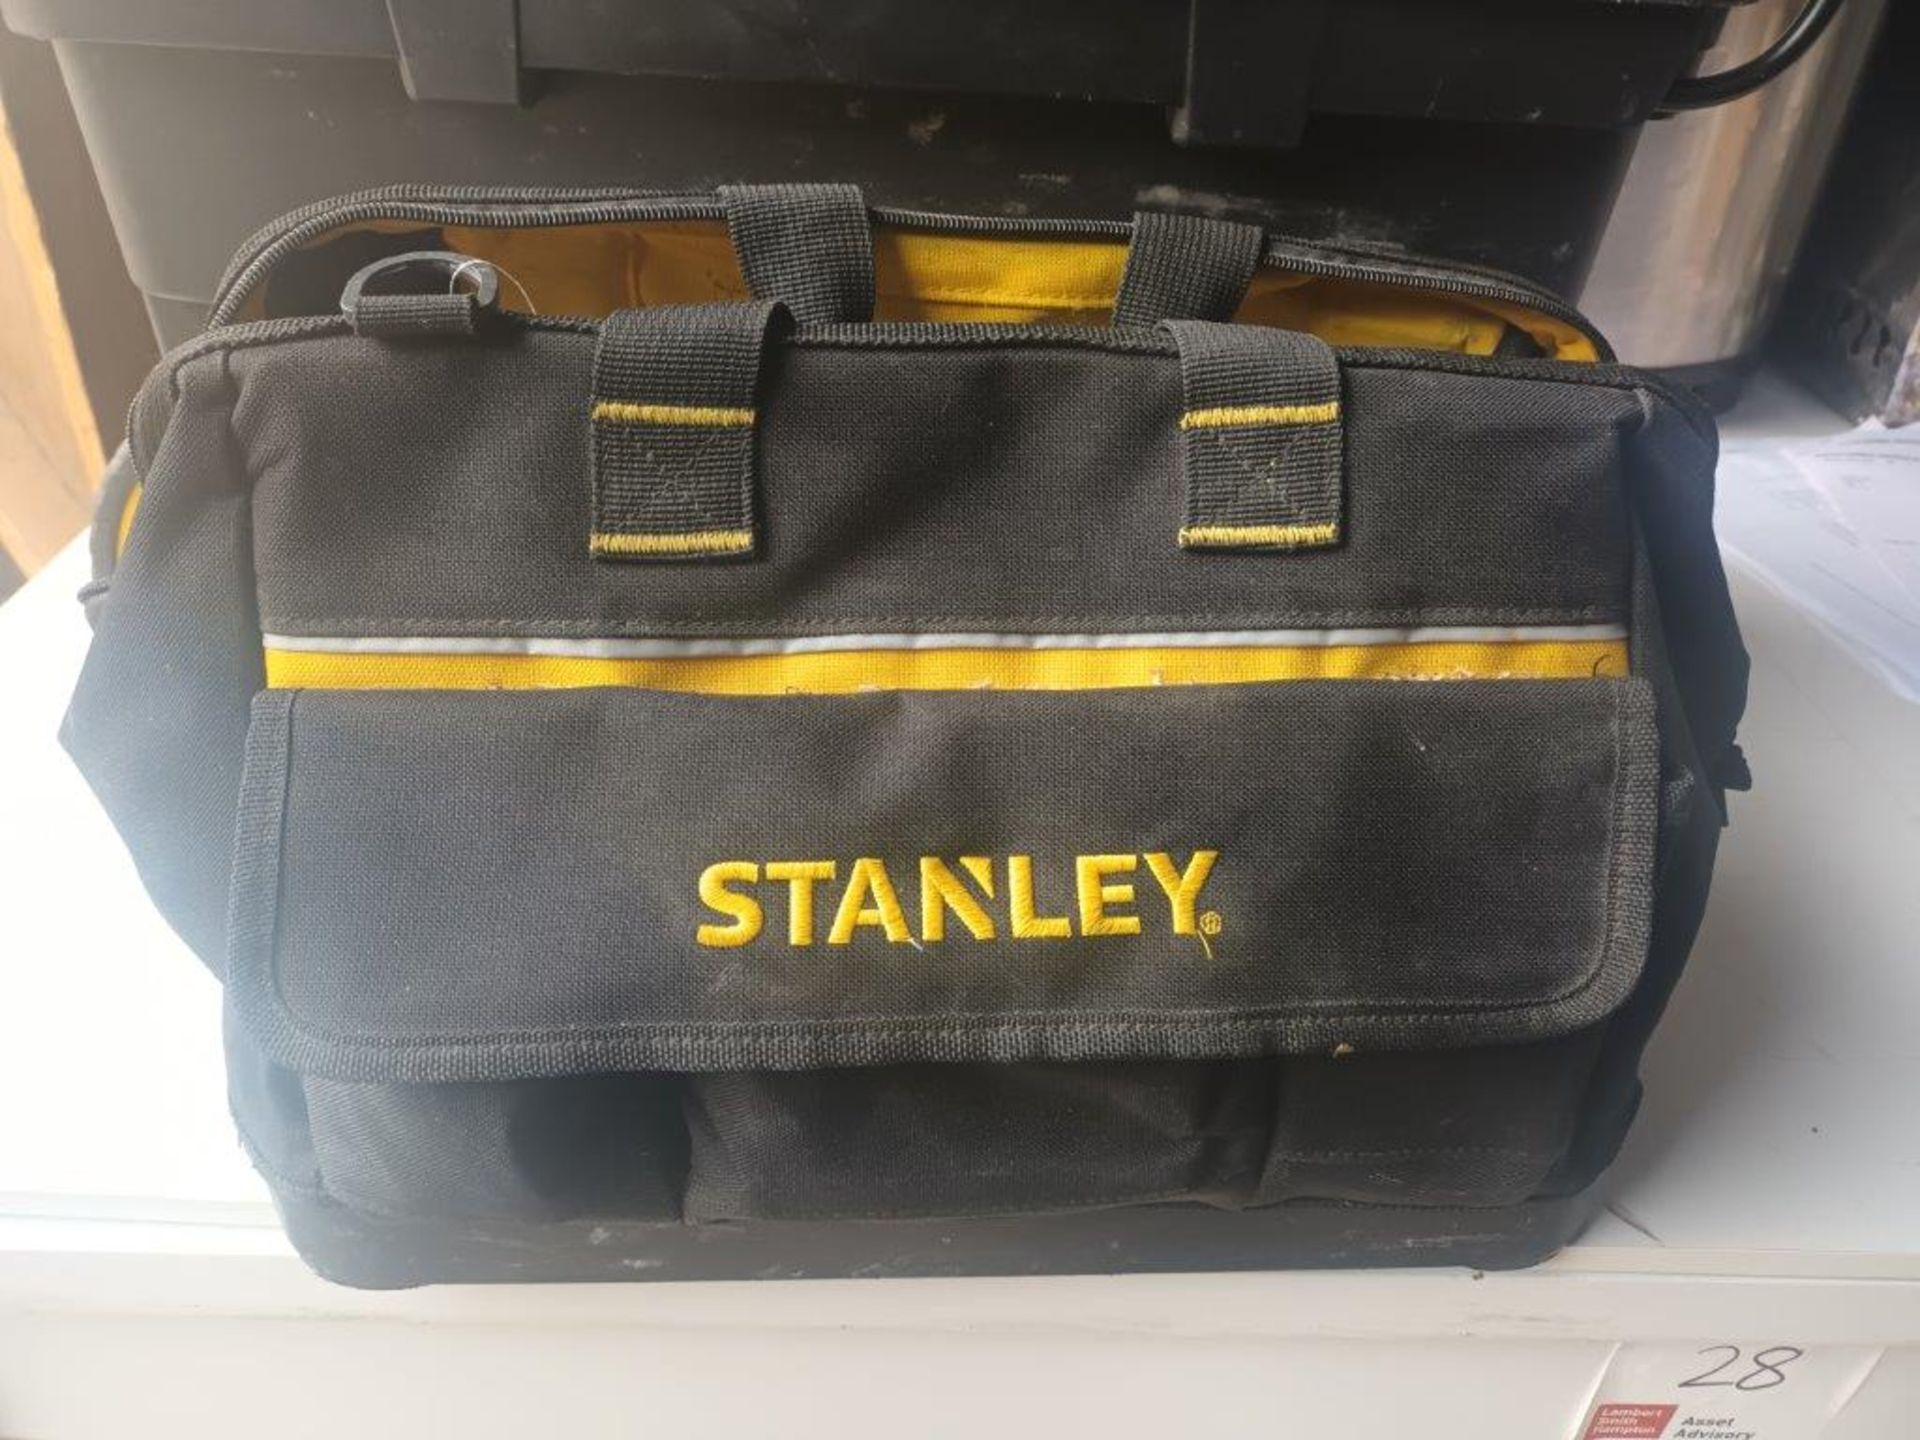 Stanley tool box on wheels and Stanley tool bag with various handtools - Image 2 of 5